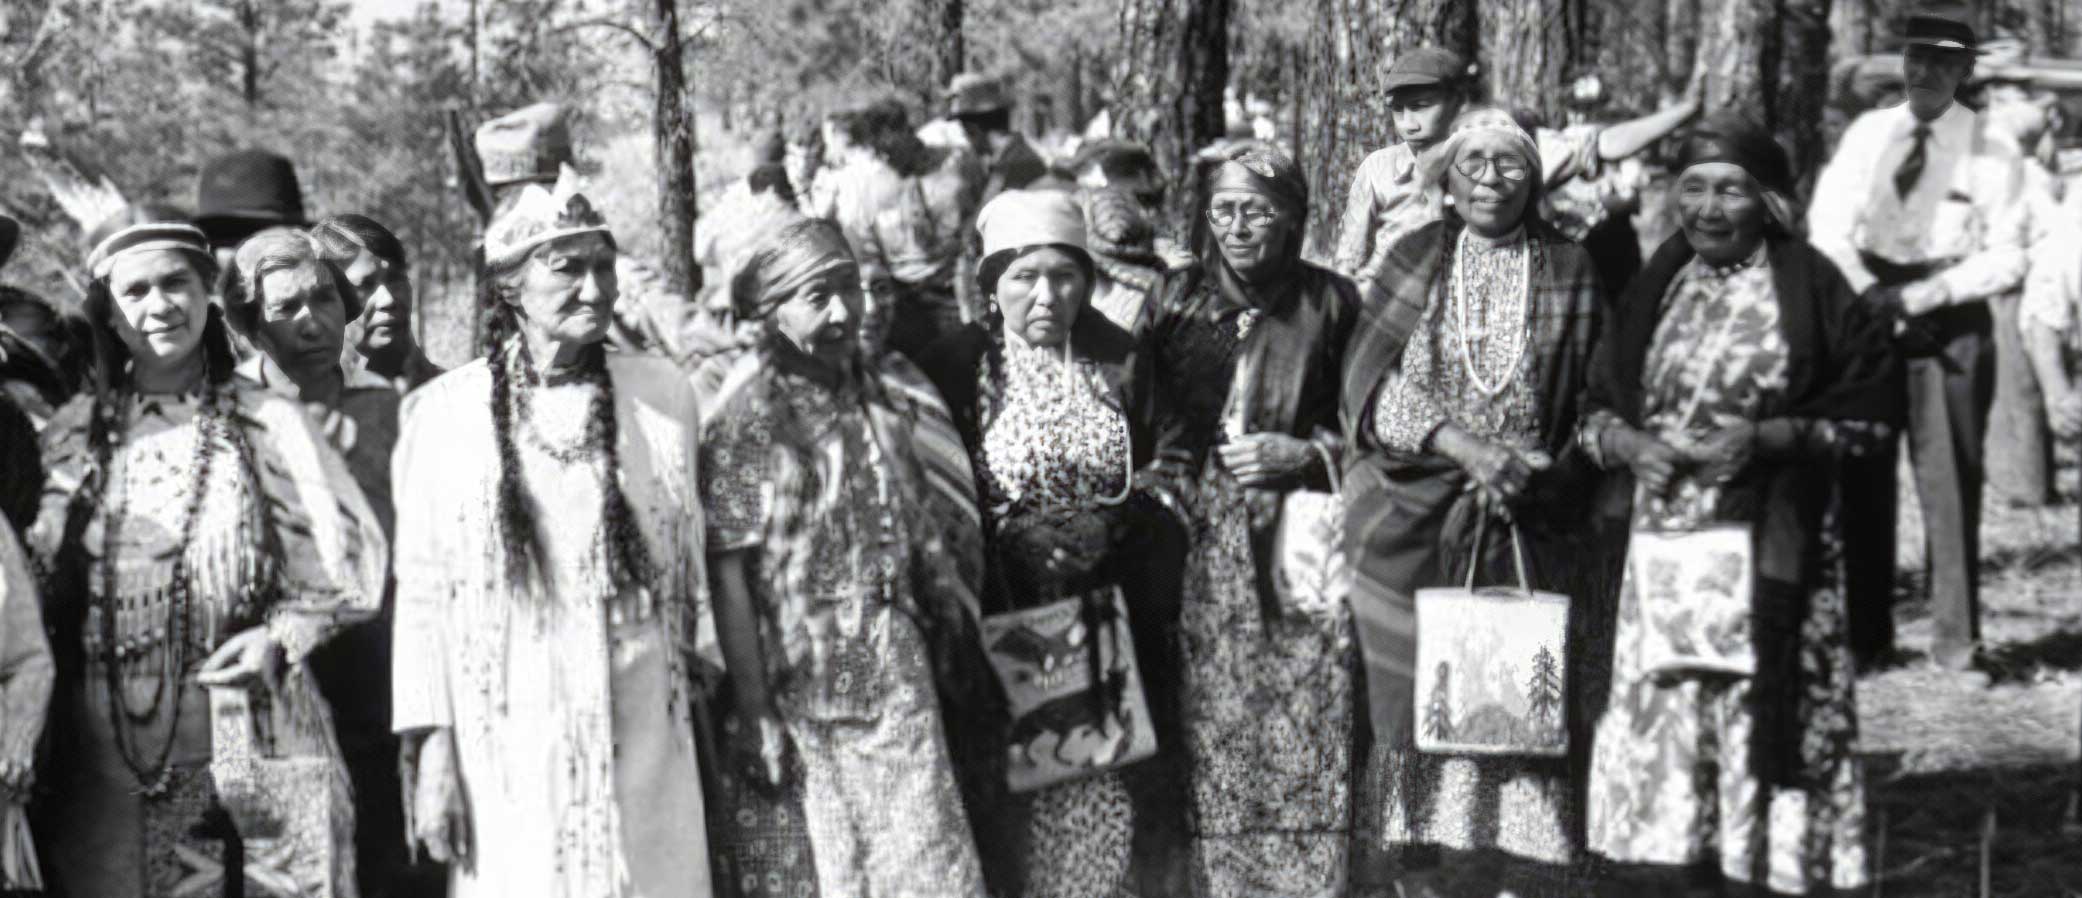 Historical image of Sinixt women at the Ceremony of Tears